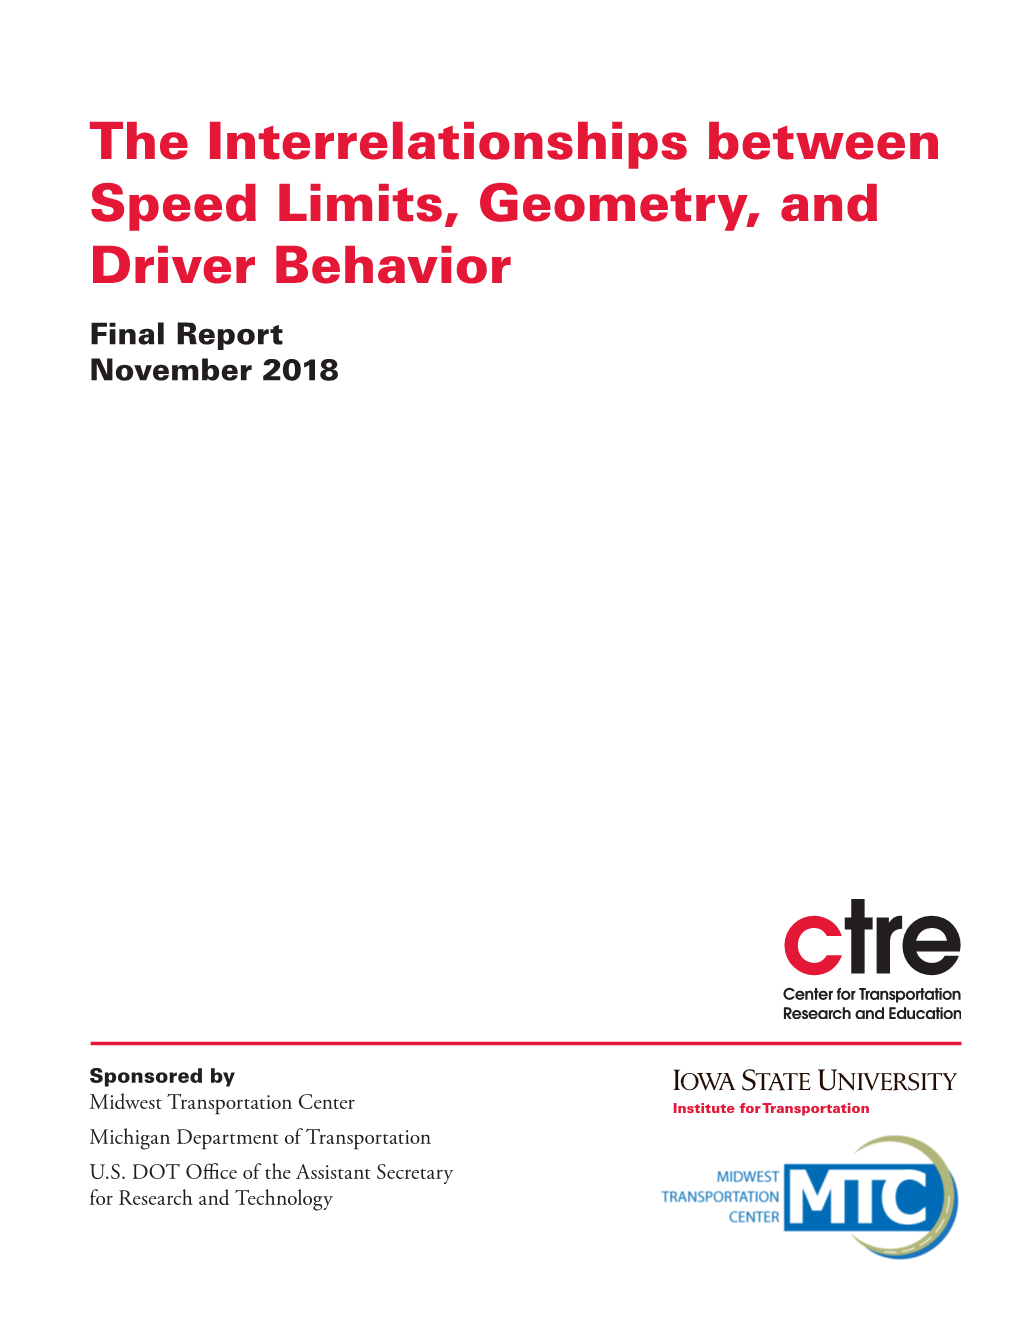 The Interrelationships Between Speed Limits, Geometry, and Driver Behavior Final Report November 2018